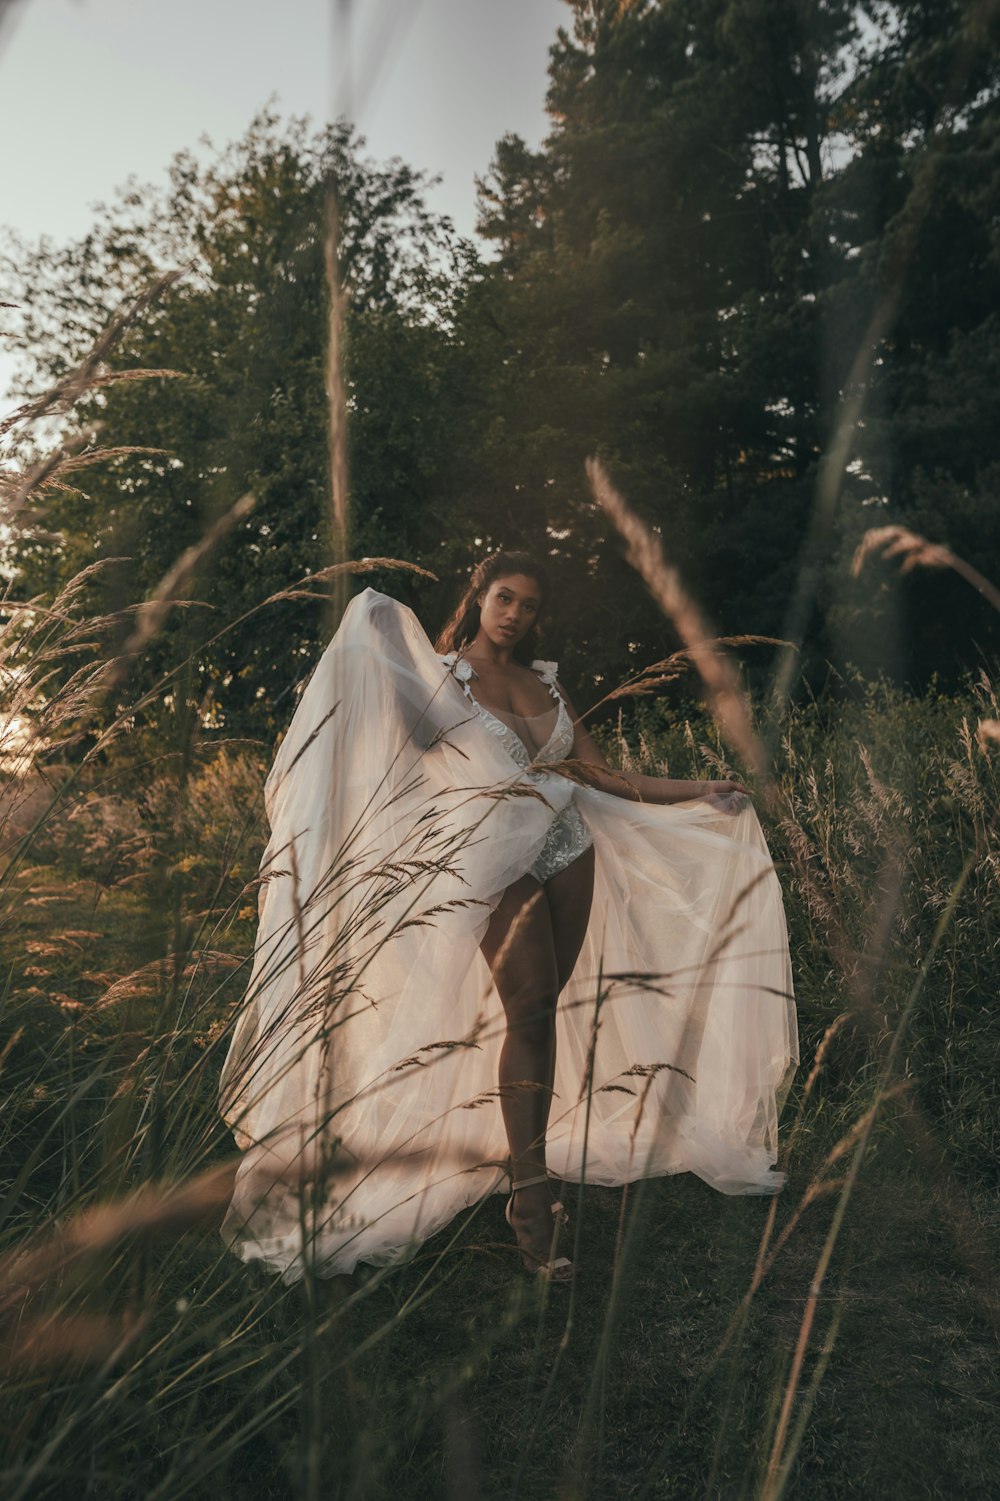 a woman in a white dress standing in tall grass